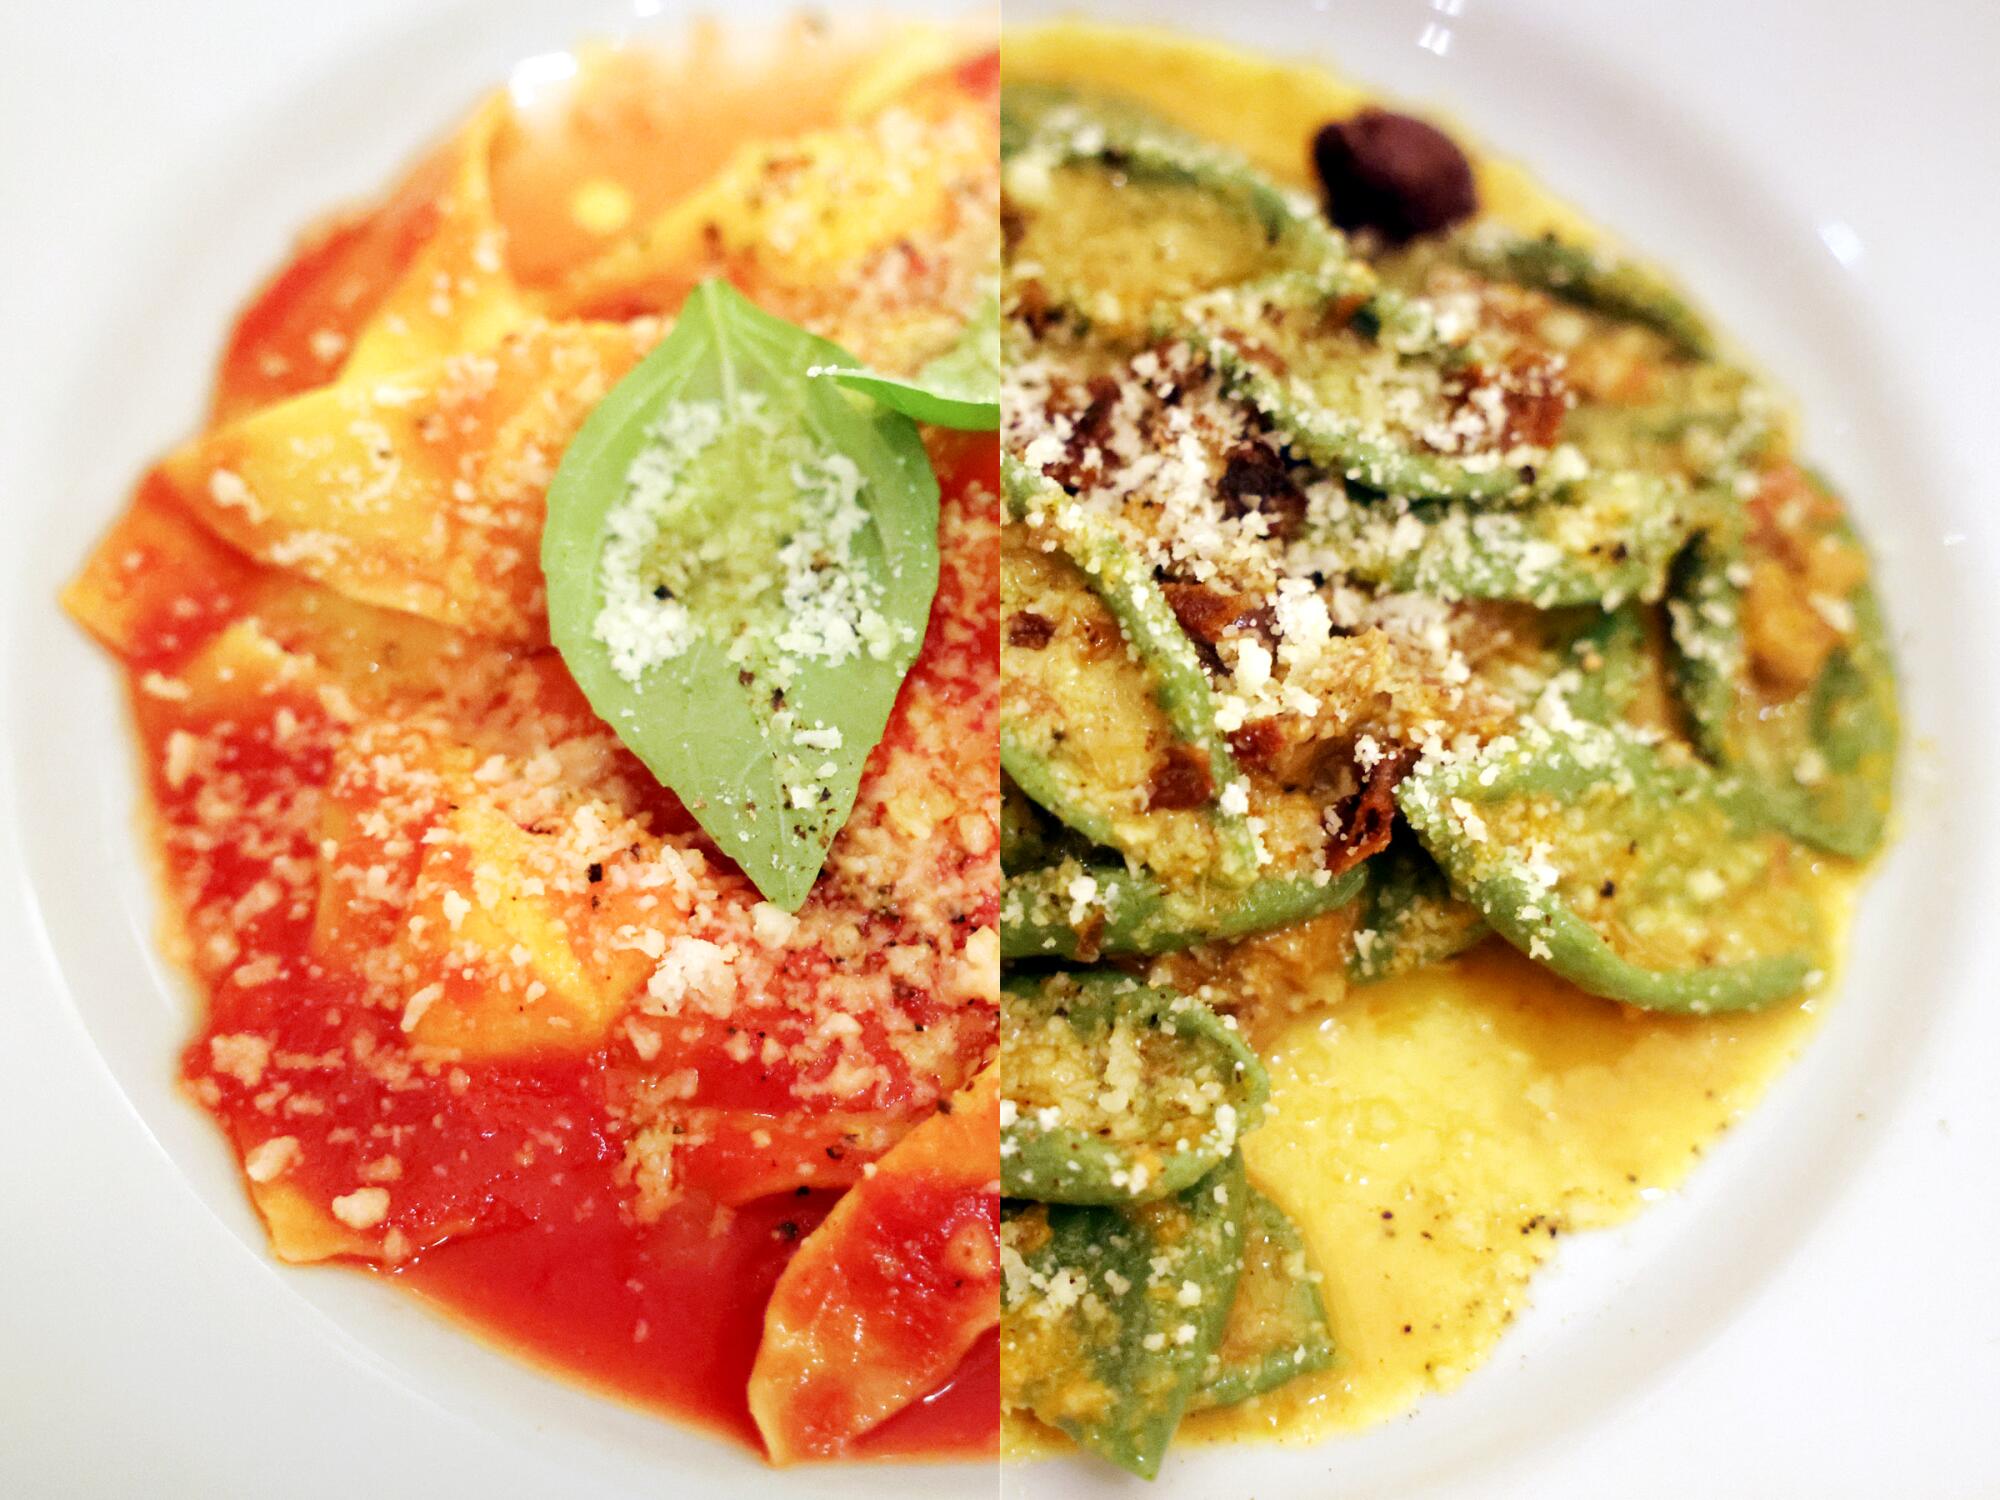 Two photos side-by-side of a red pasta on the left and a green pasta on the right.